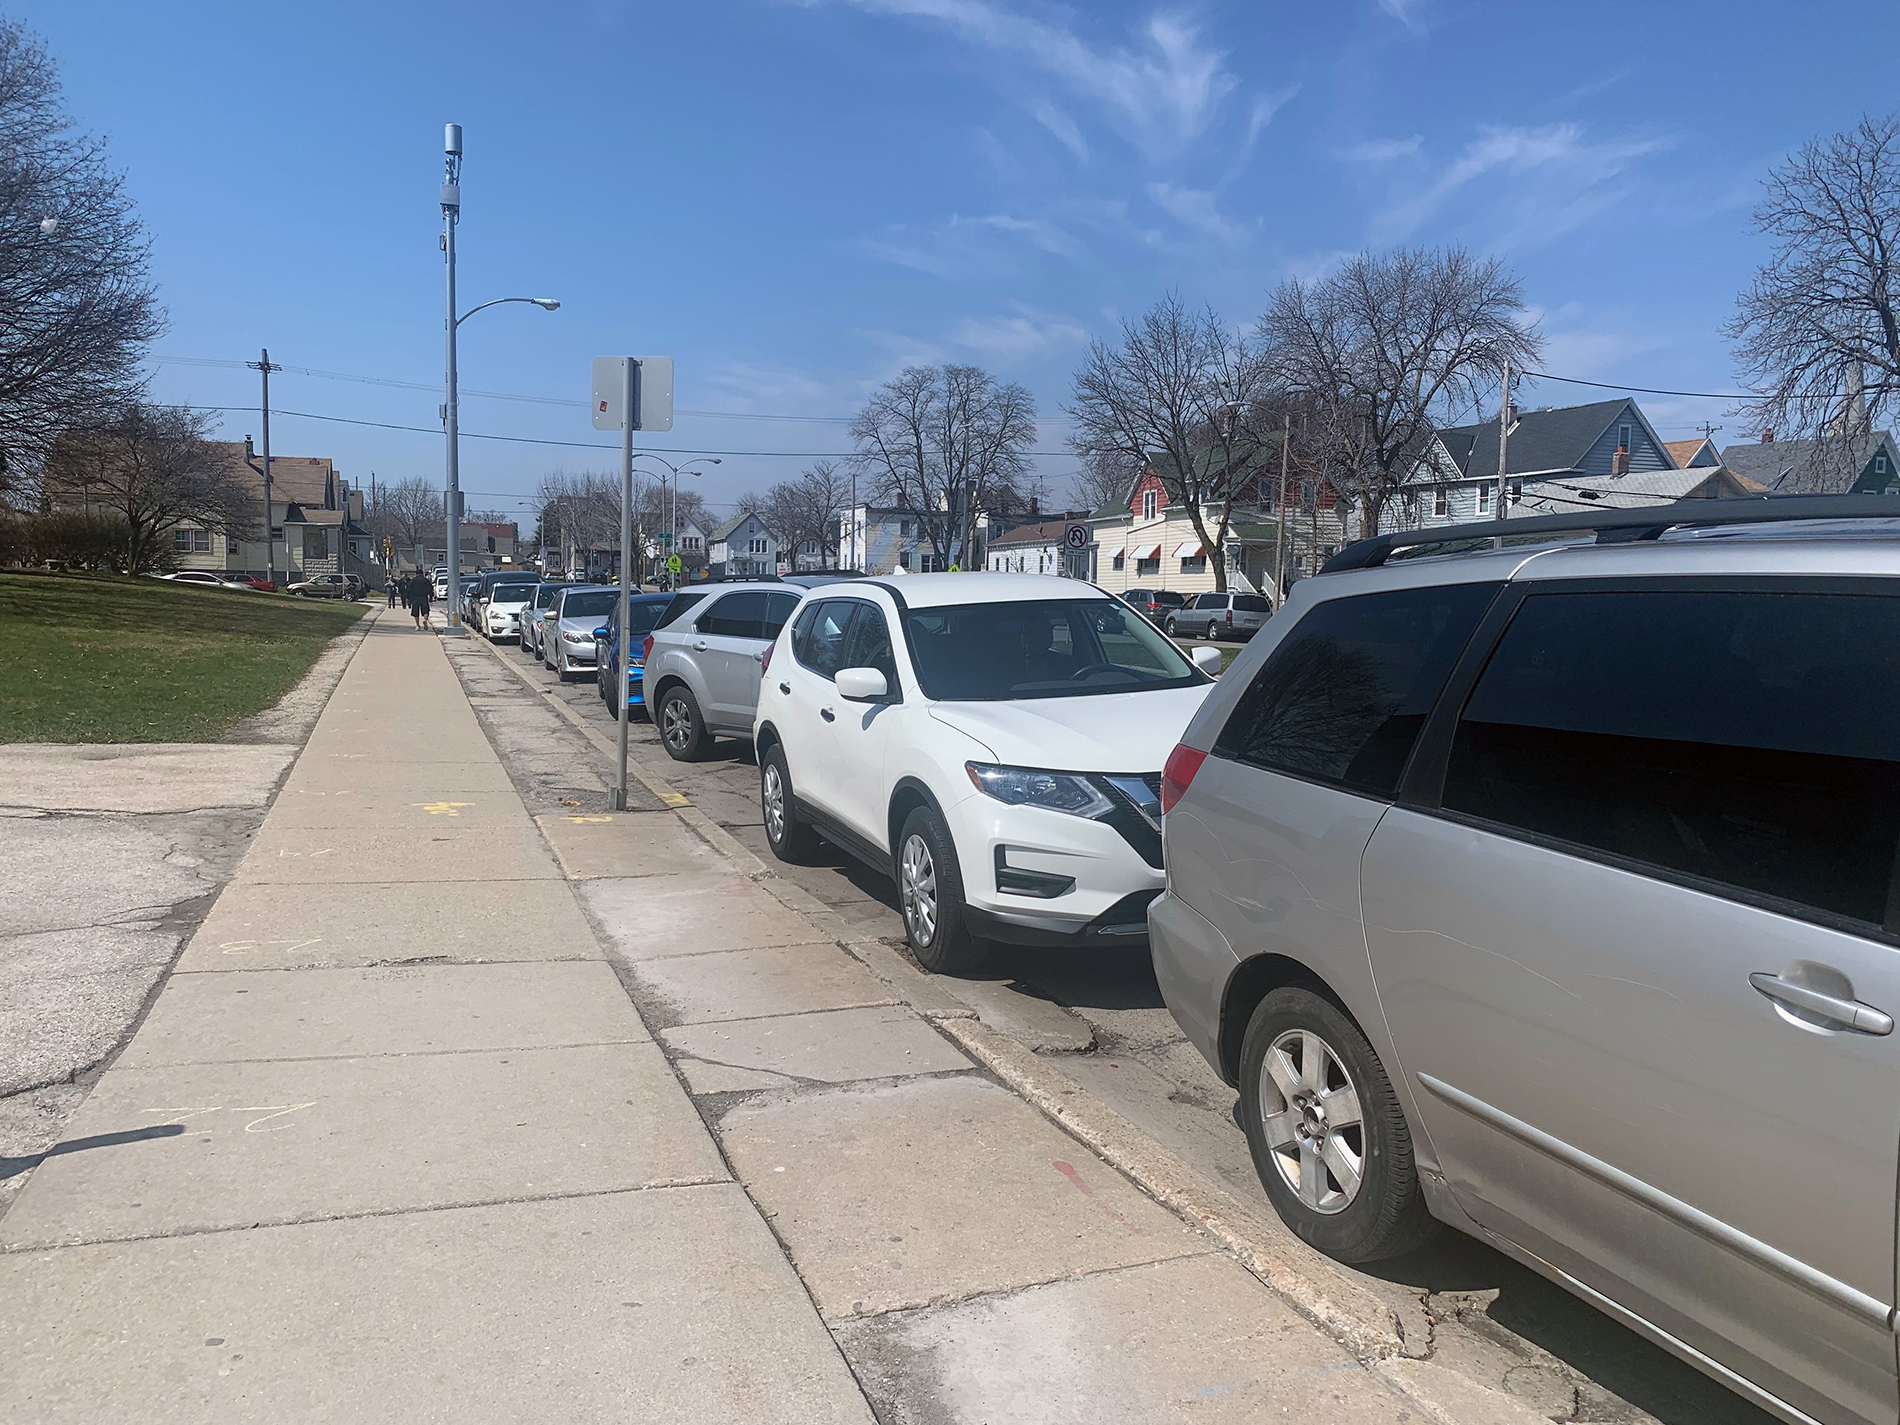 Cars line up to vote curbside at South Division High School in Milwaukee